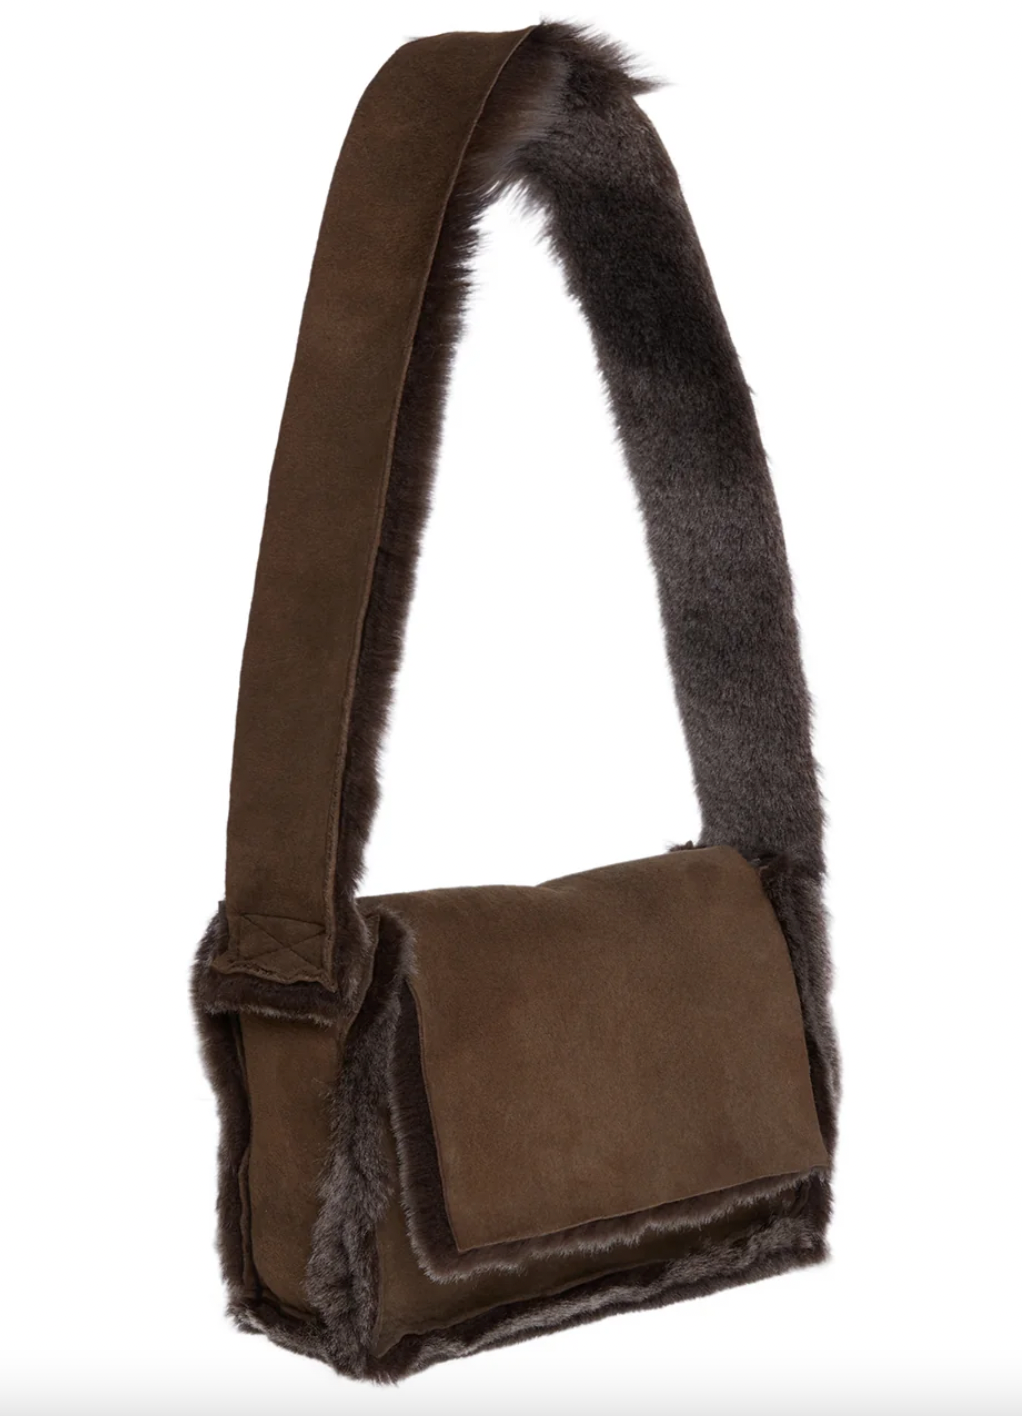 Product Image for Minerva Bag, Mole Silver Tip Shearling